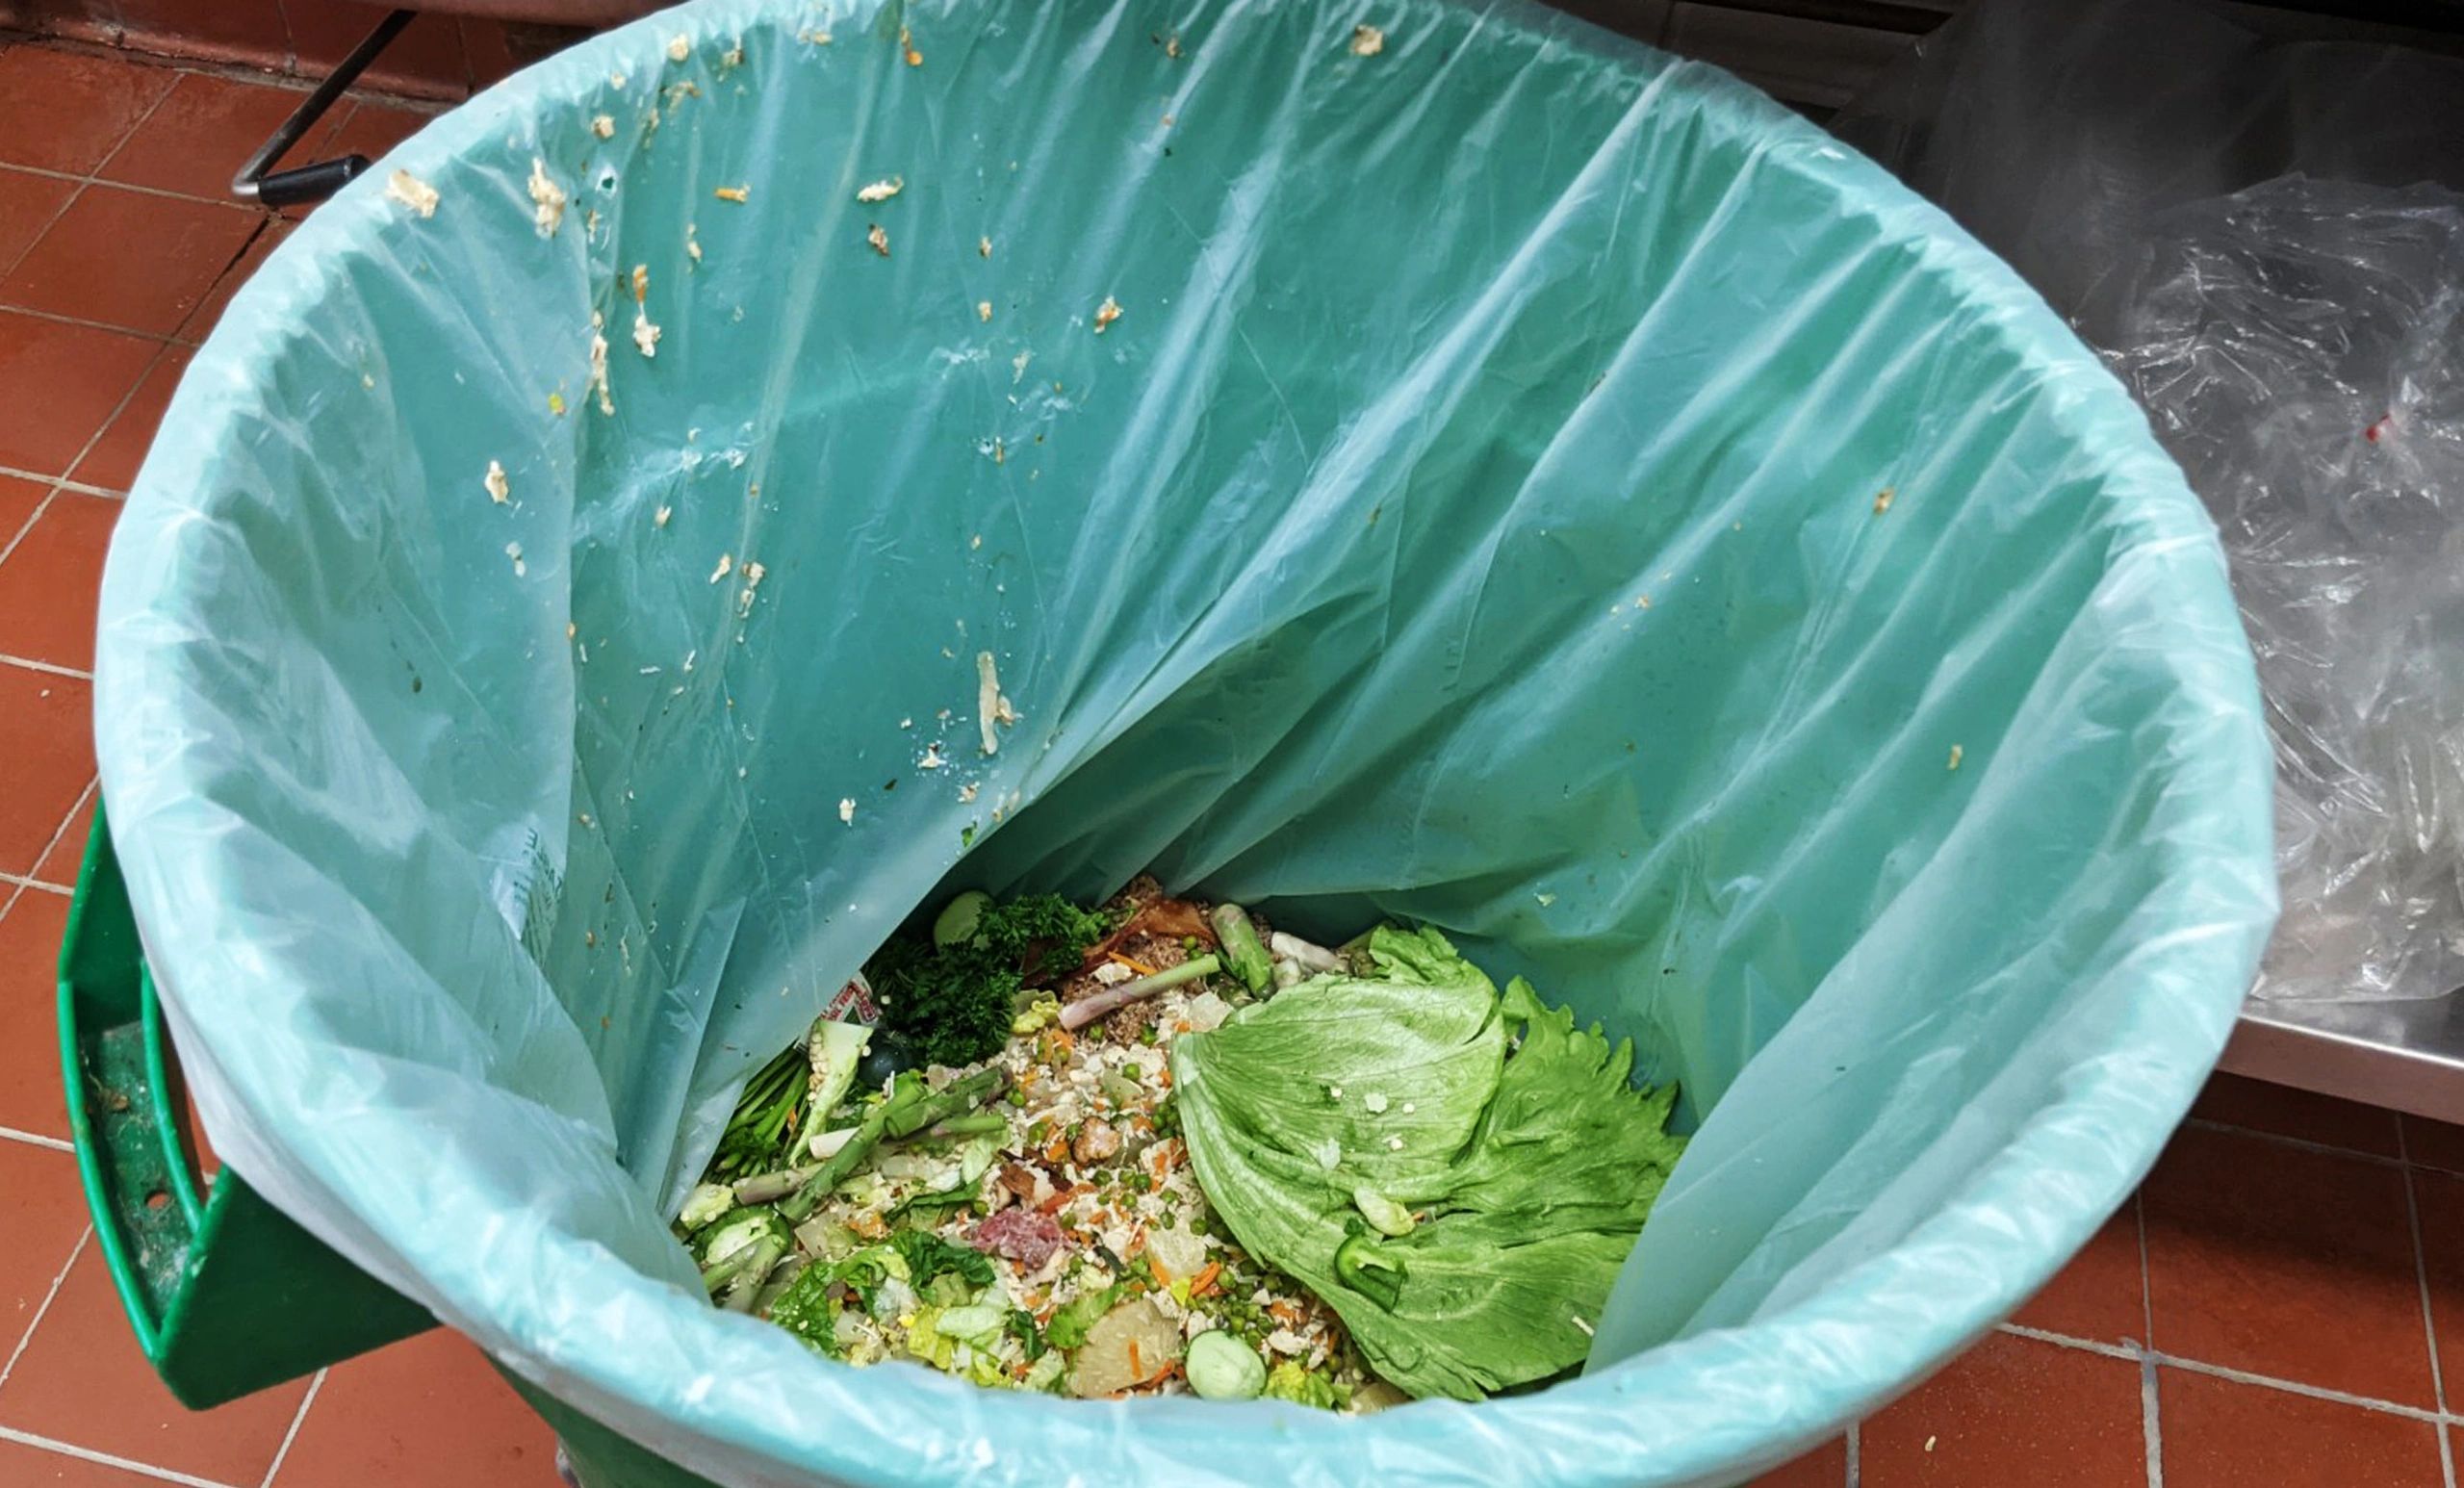 Charleston County School District switches to compostable meal